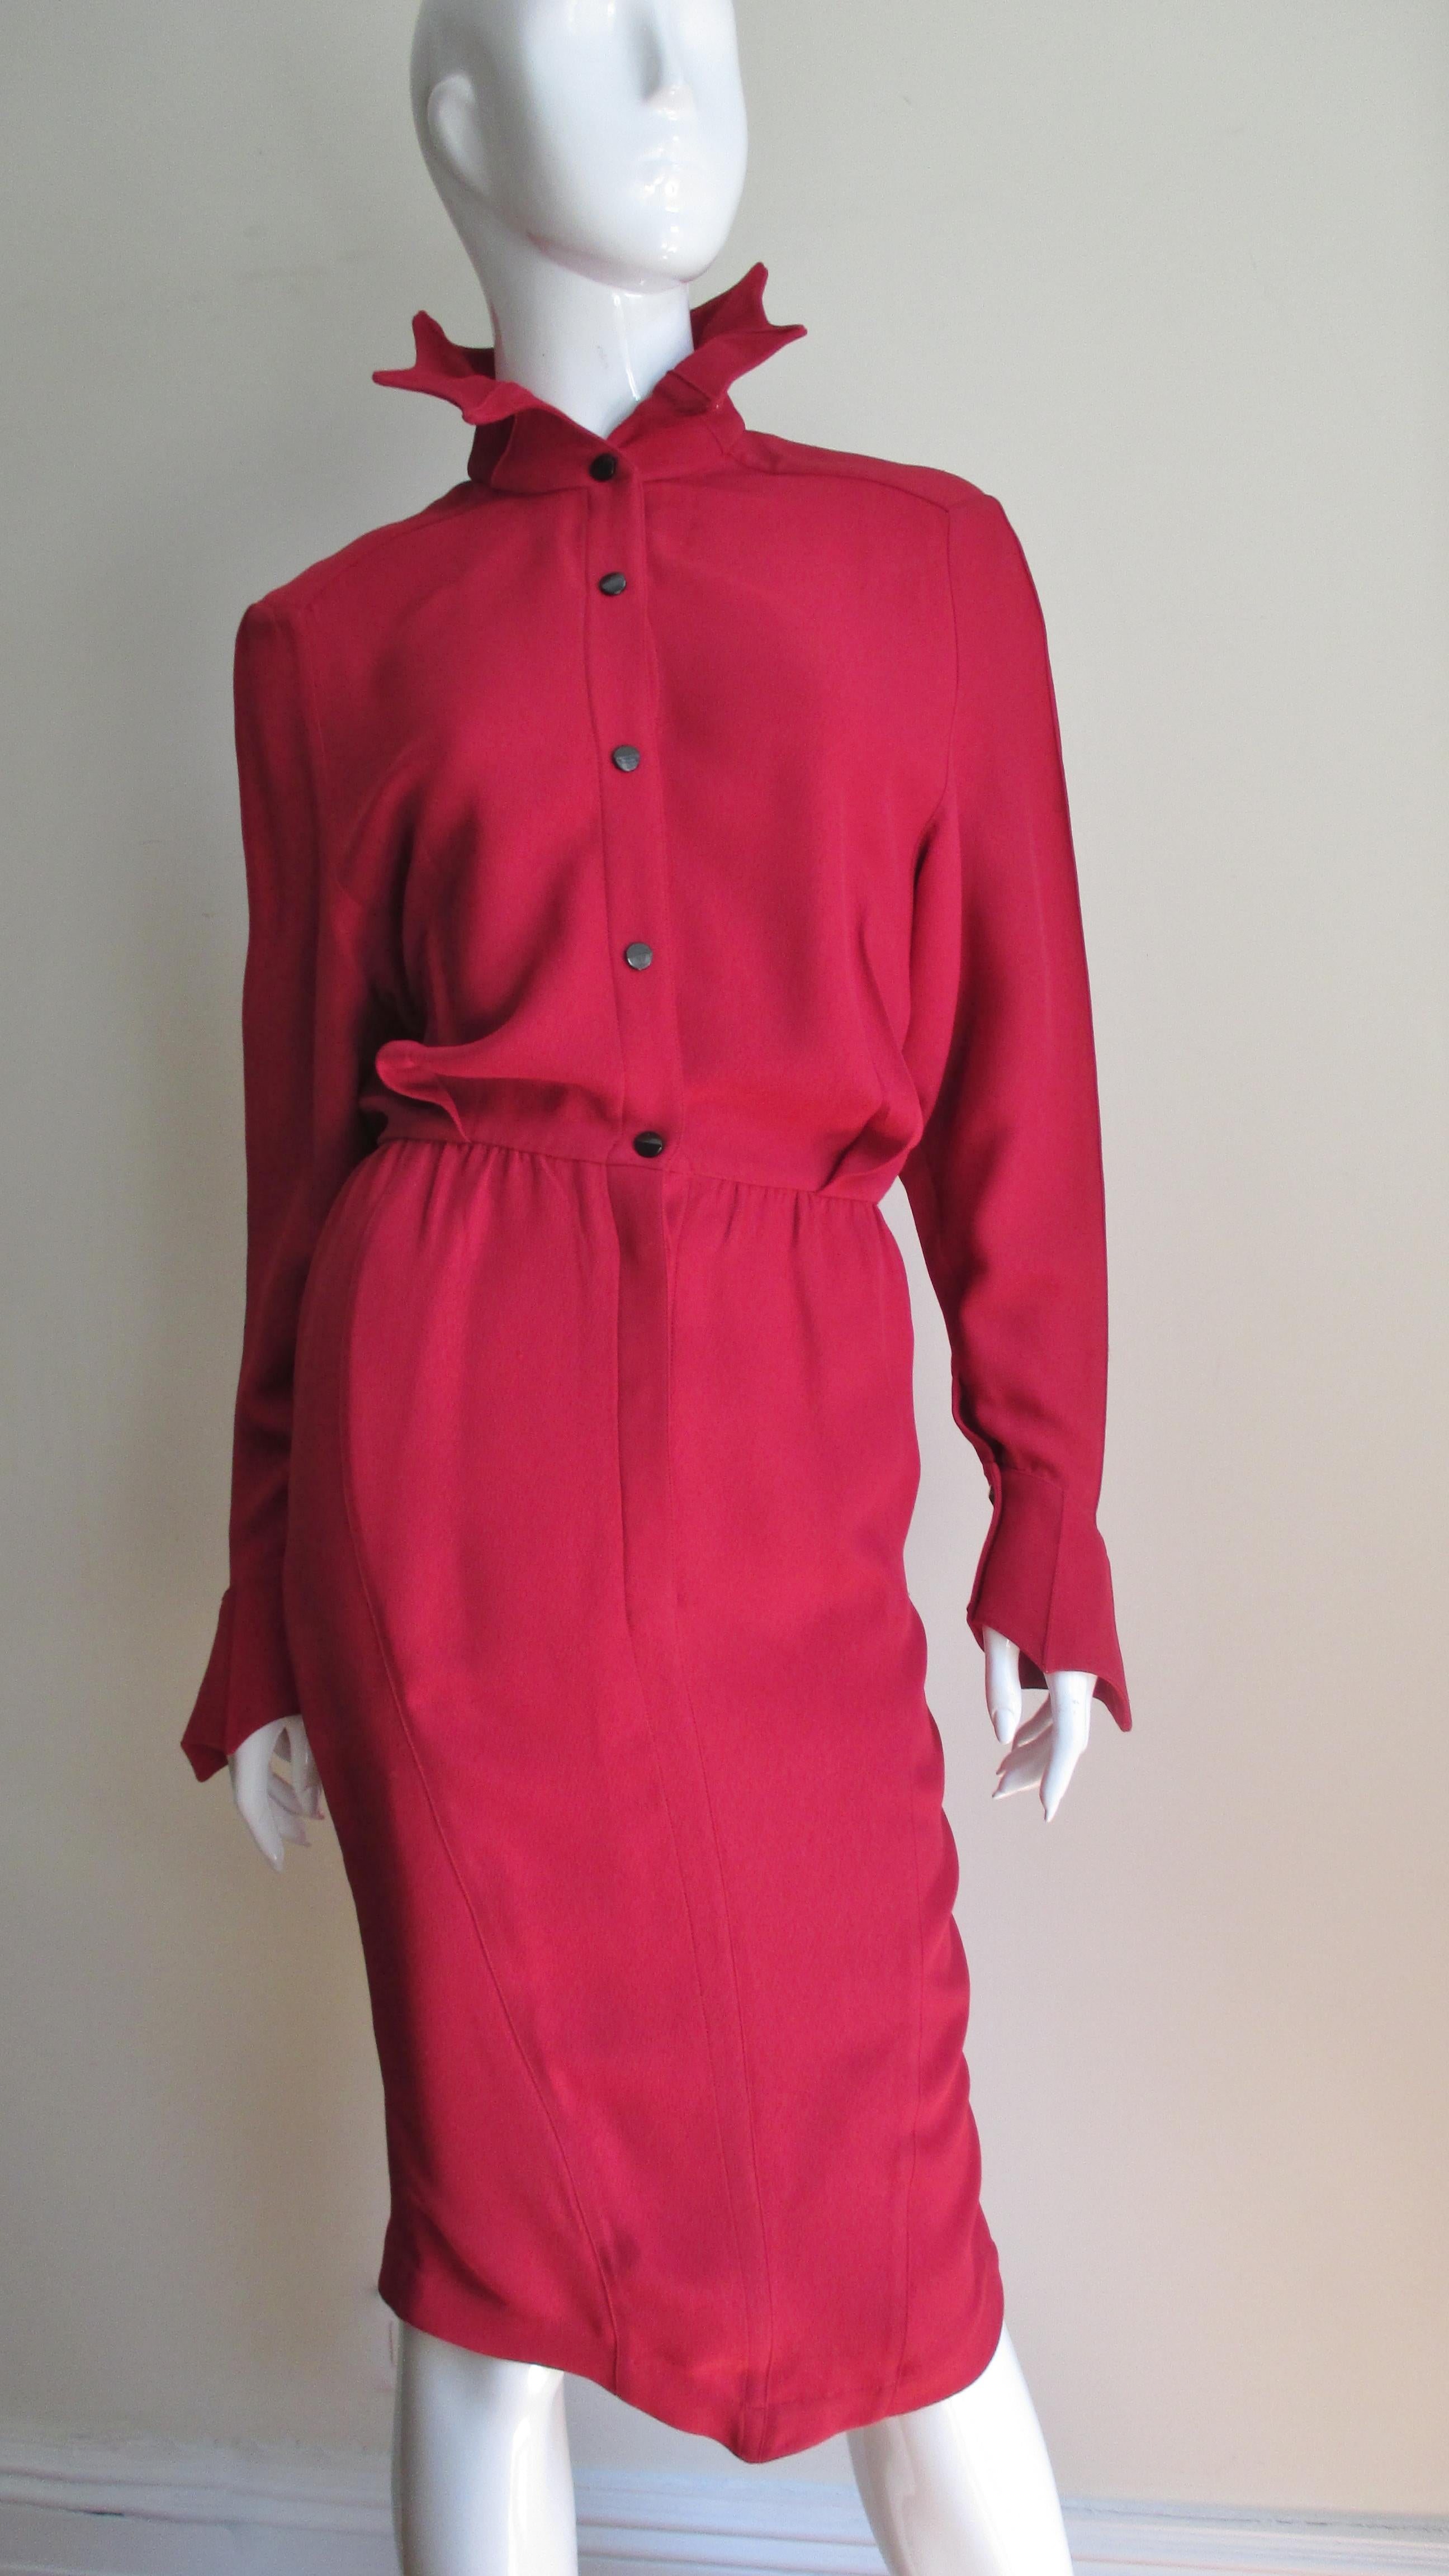 Thierry Mugler Dress with Pointed Collar and Cuffs 1980s For Sale 3